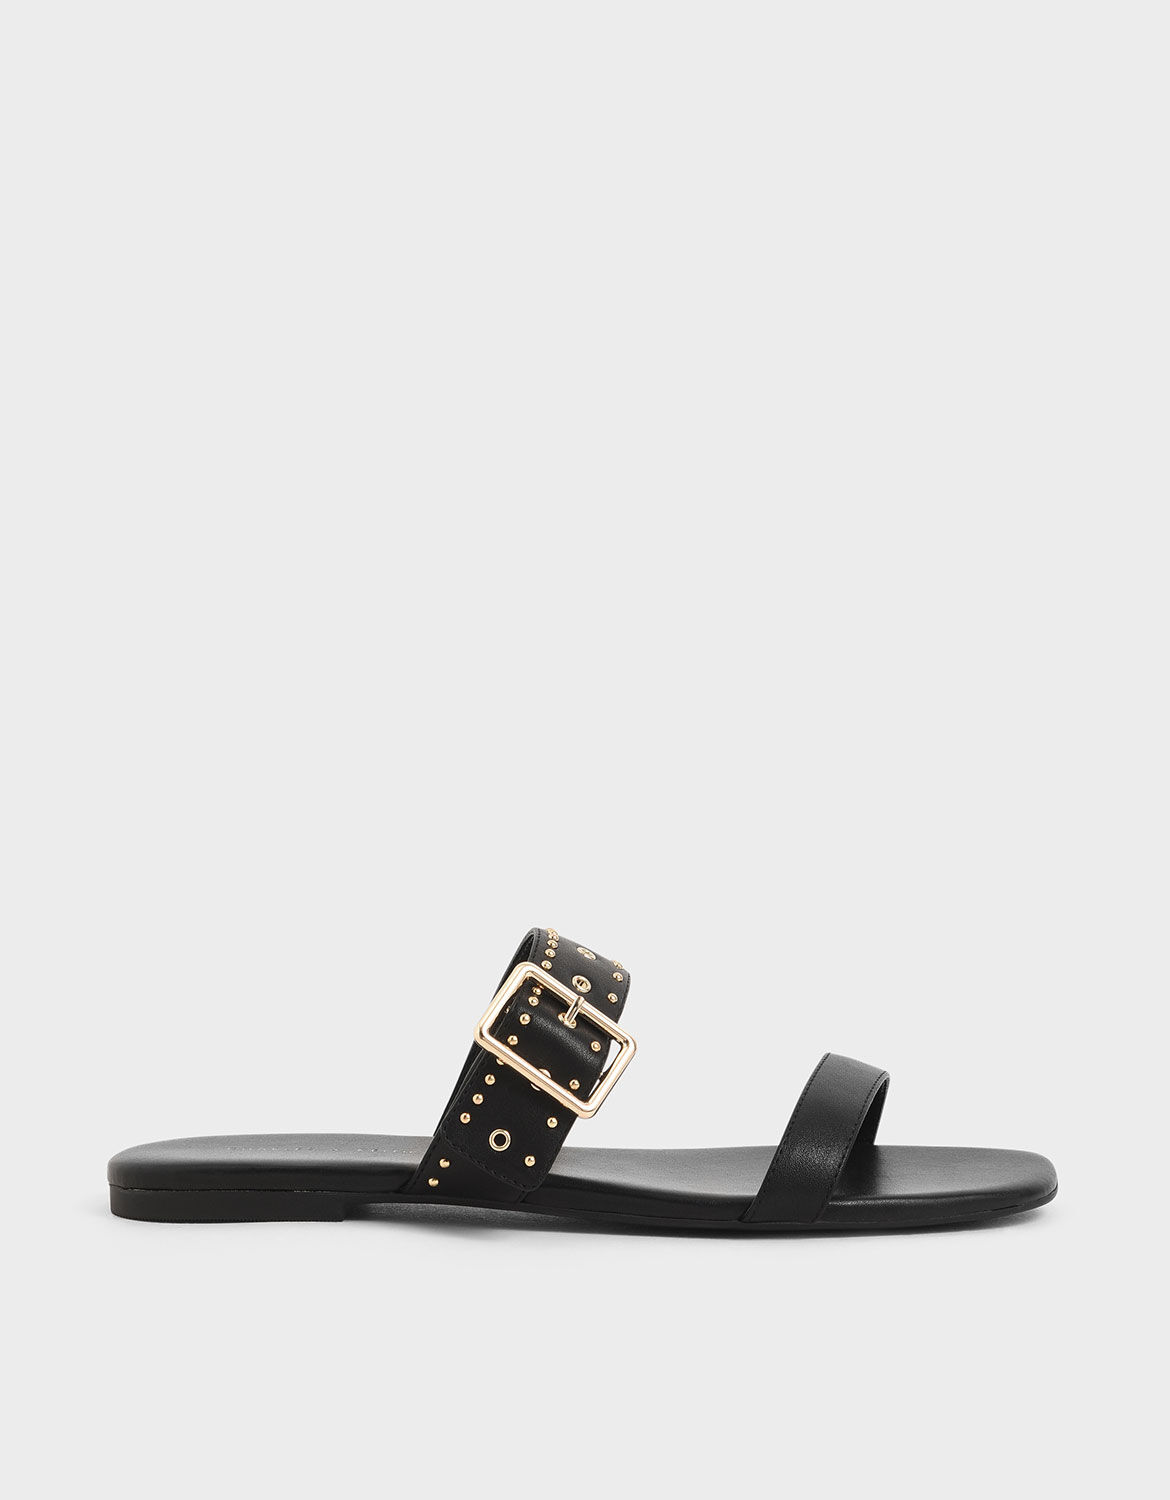 Shop Women's Sandals Online | CHARLES & KEITH SG